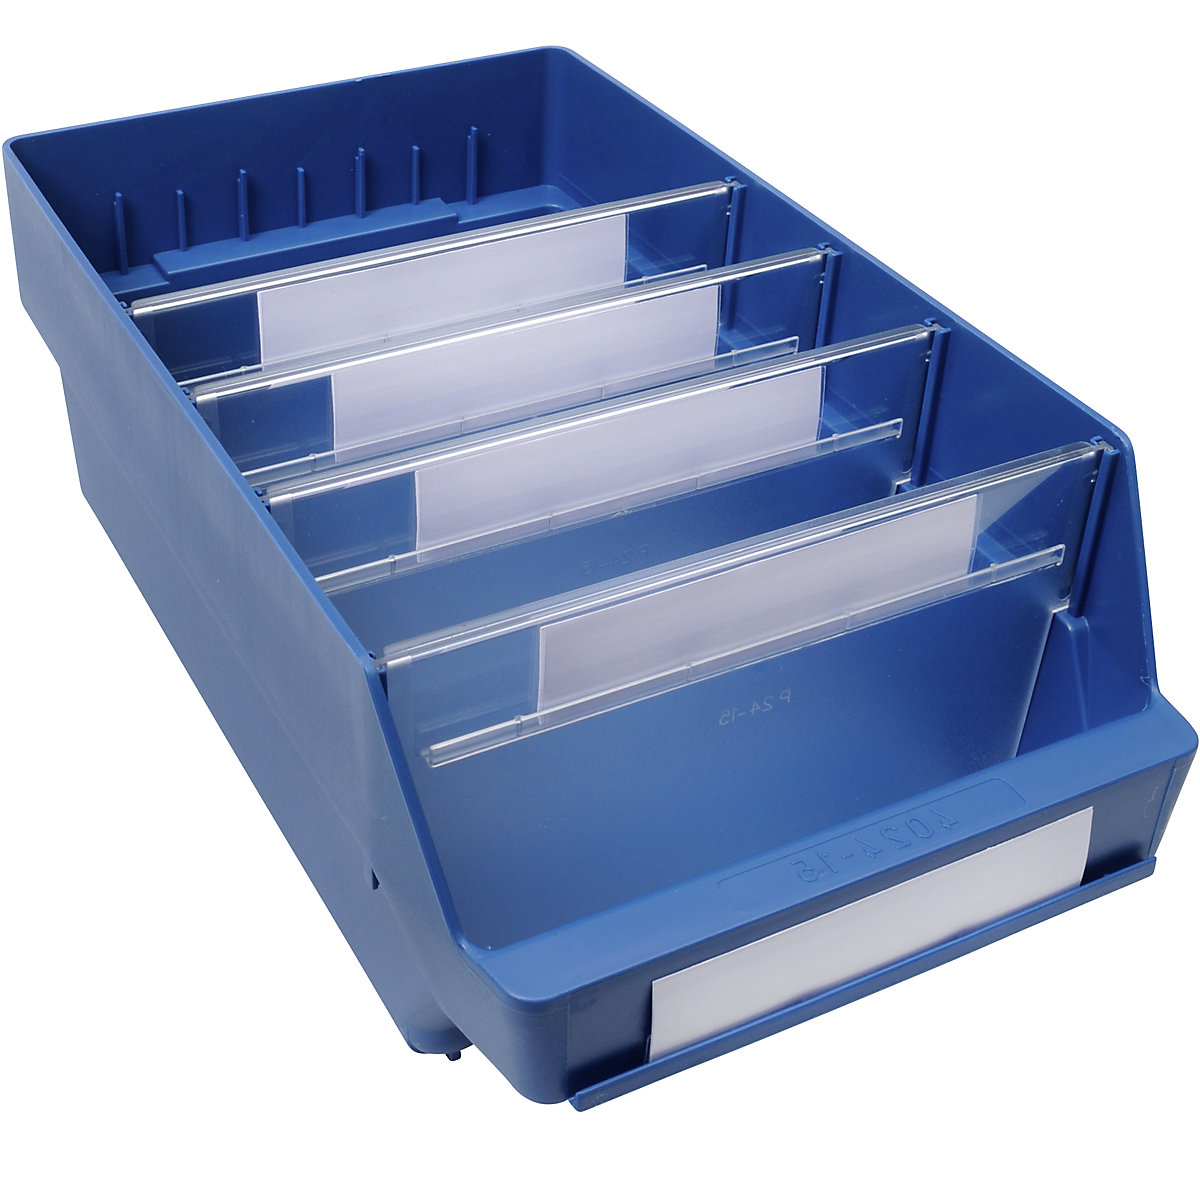 Shelf bin made of highly impact resistant polypropylene – STEMO, blue, LxWxH 400 x 240 x 150 mm, pack of 10-9